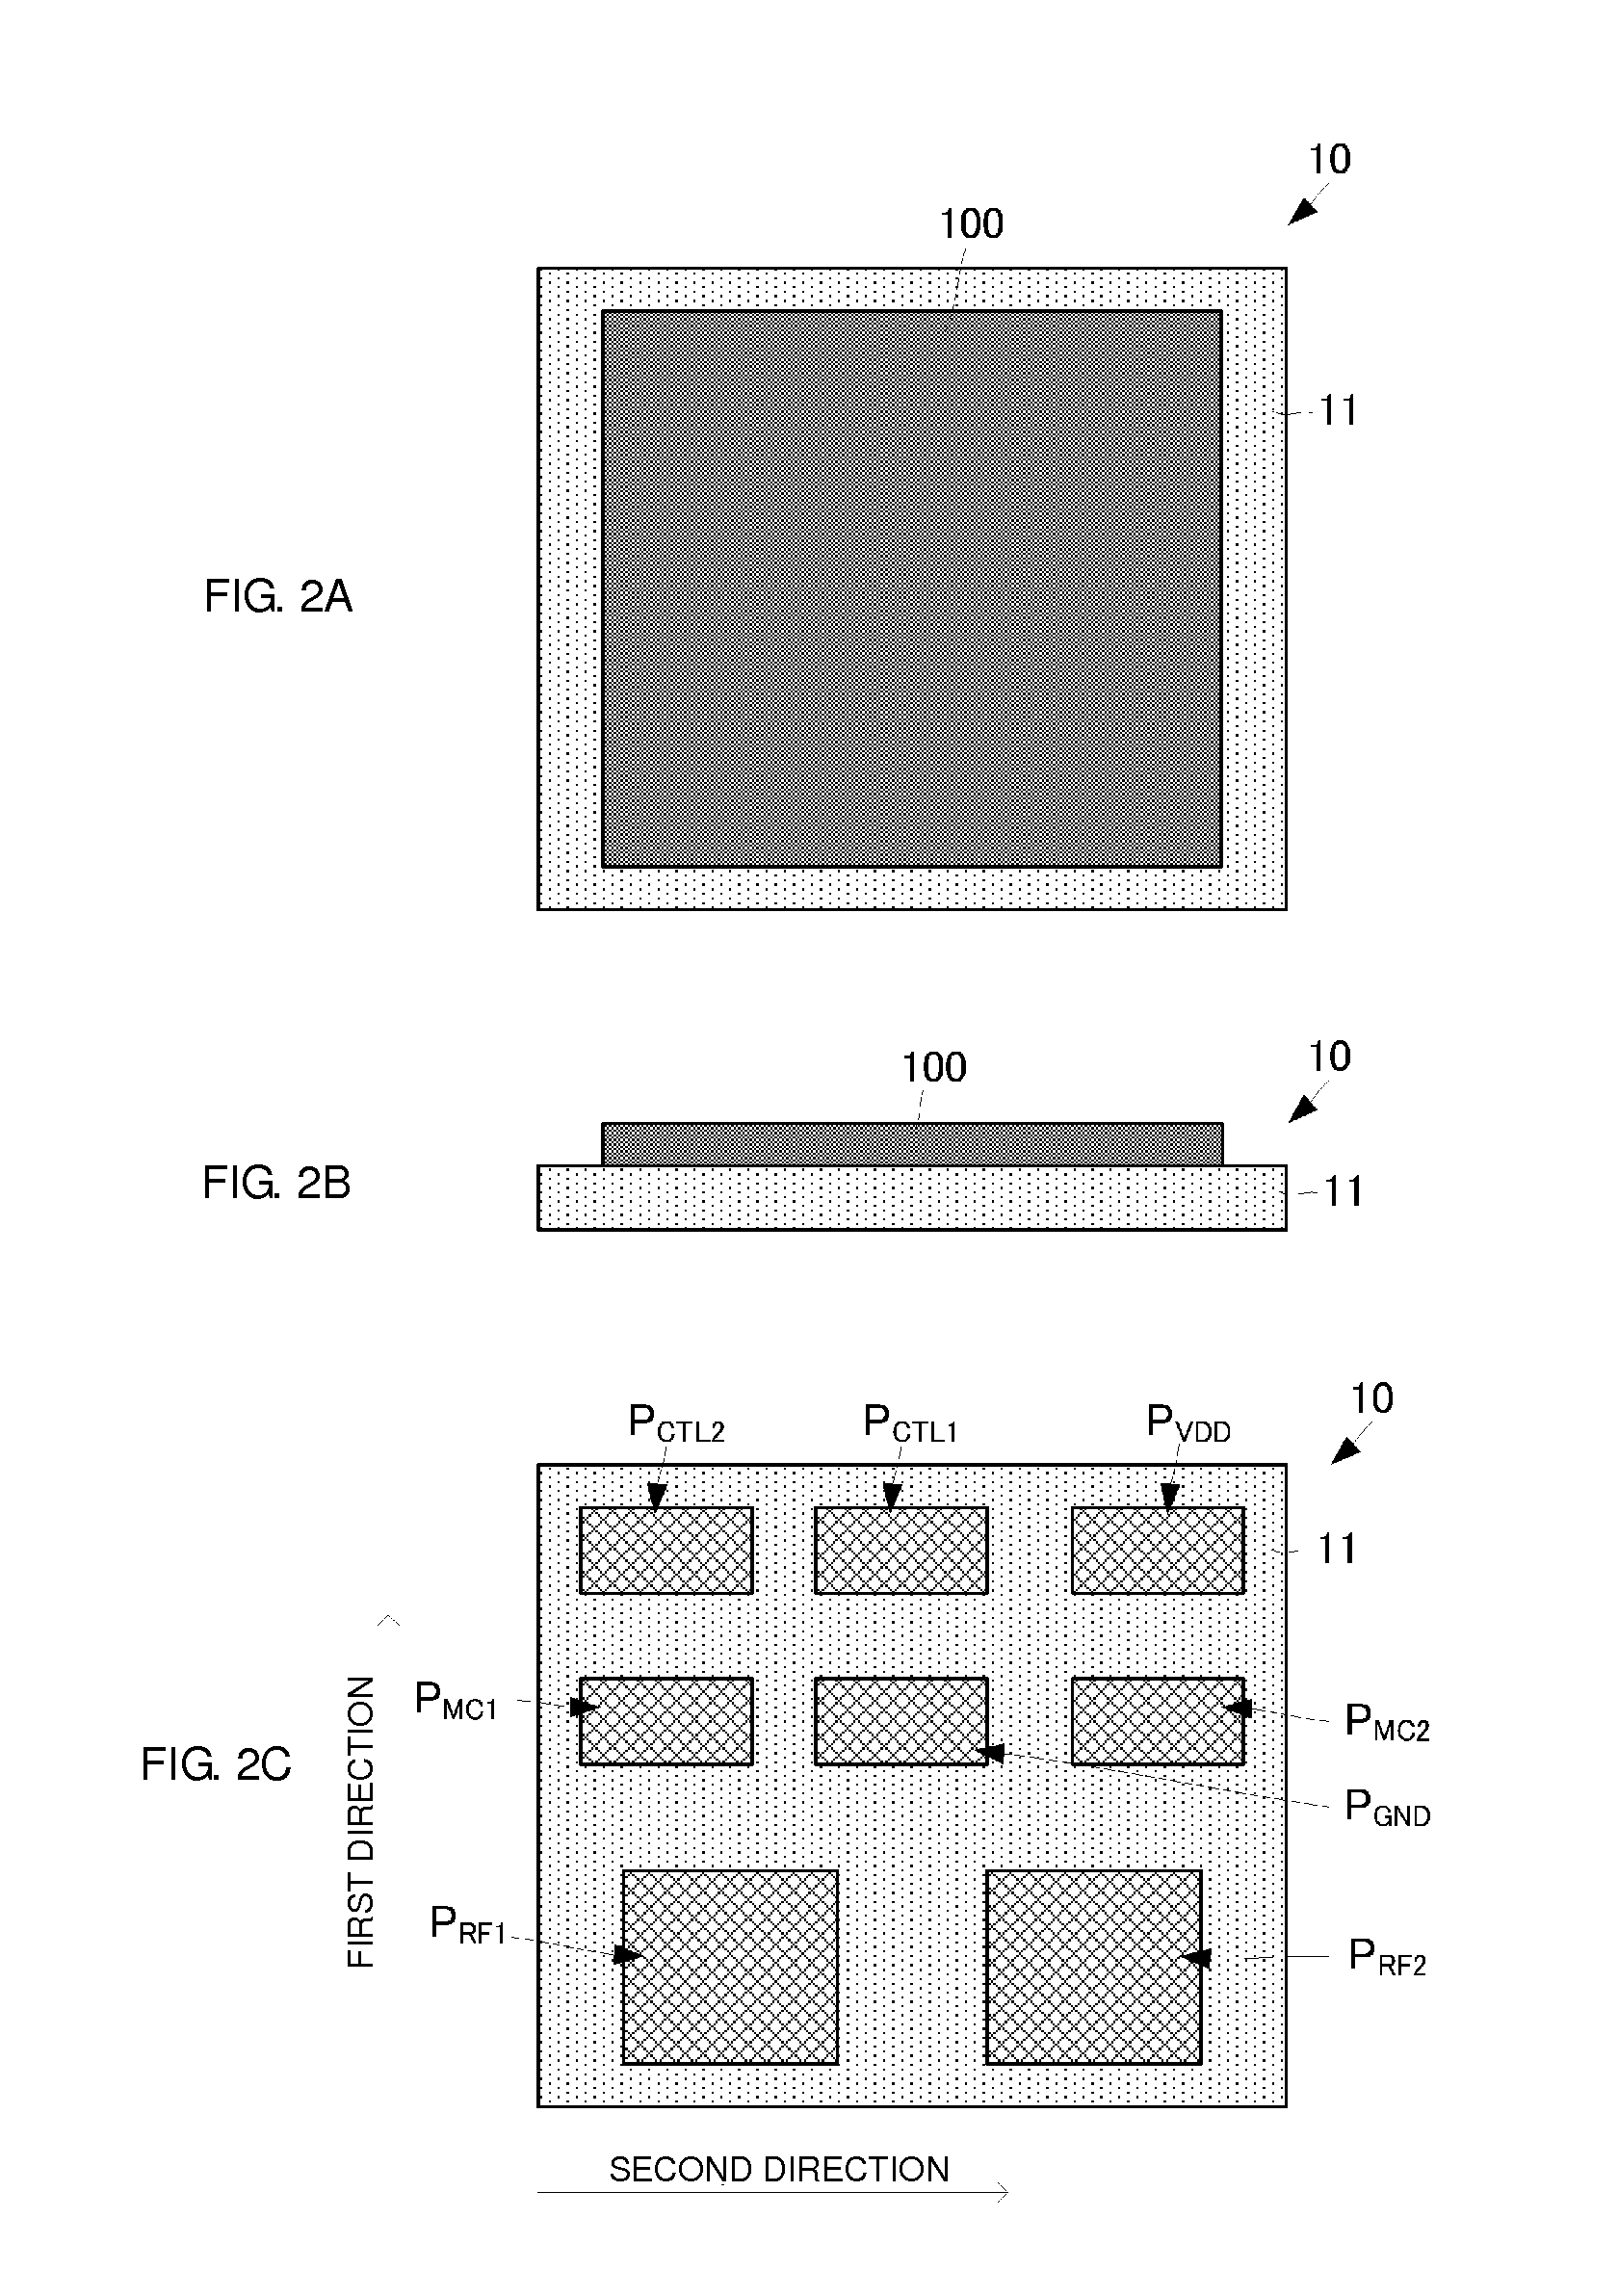 Impedance matching switch circuit, impedance matching switch circuit module, and impedance matching circuit module